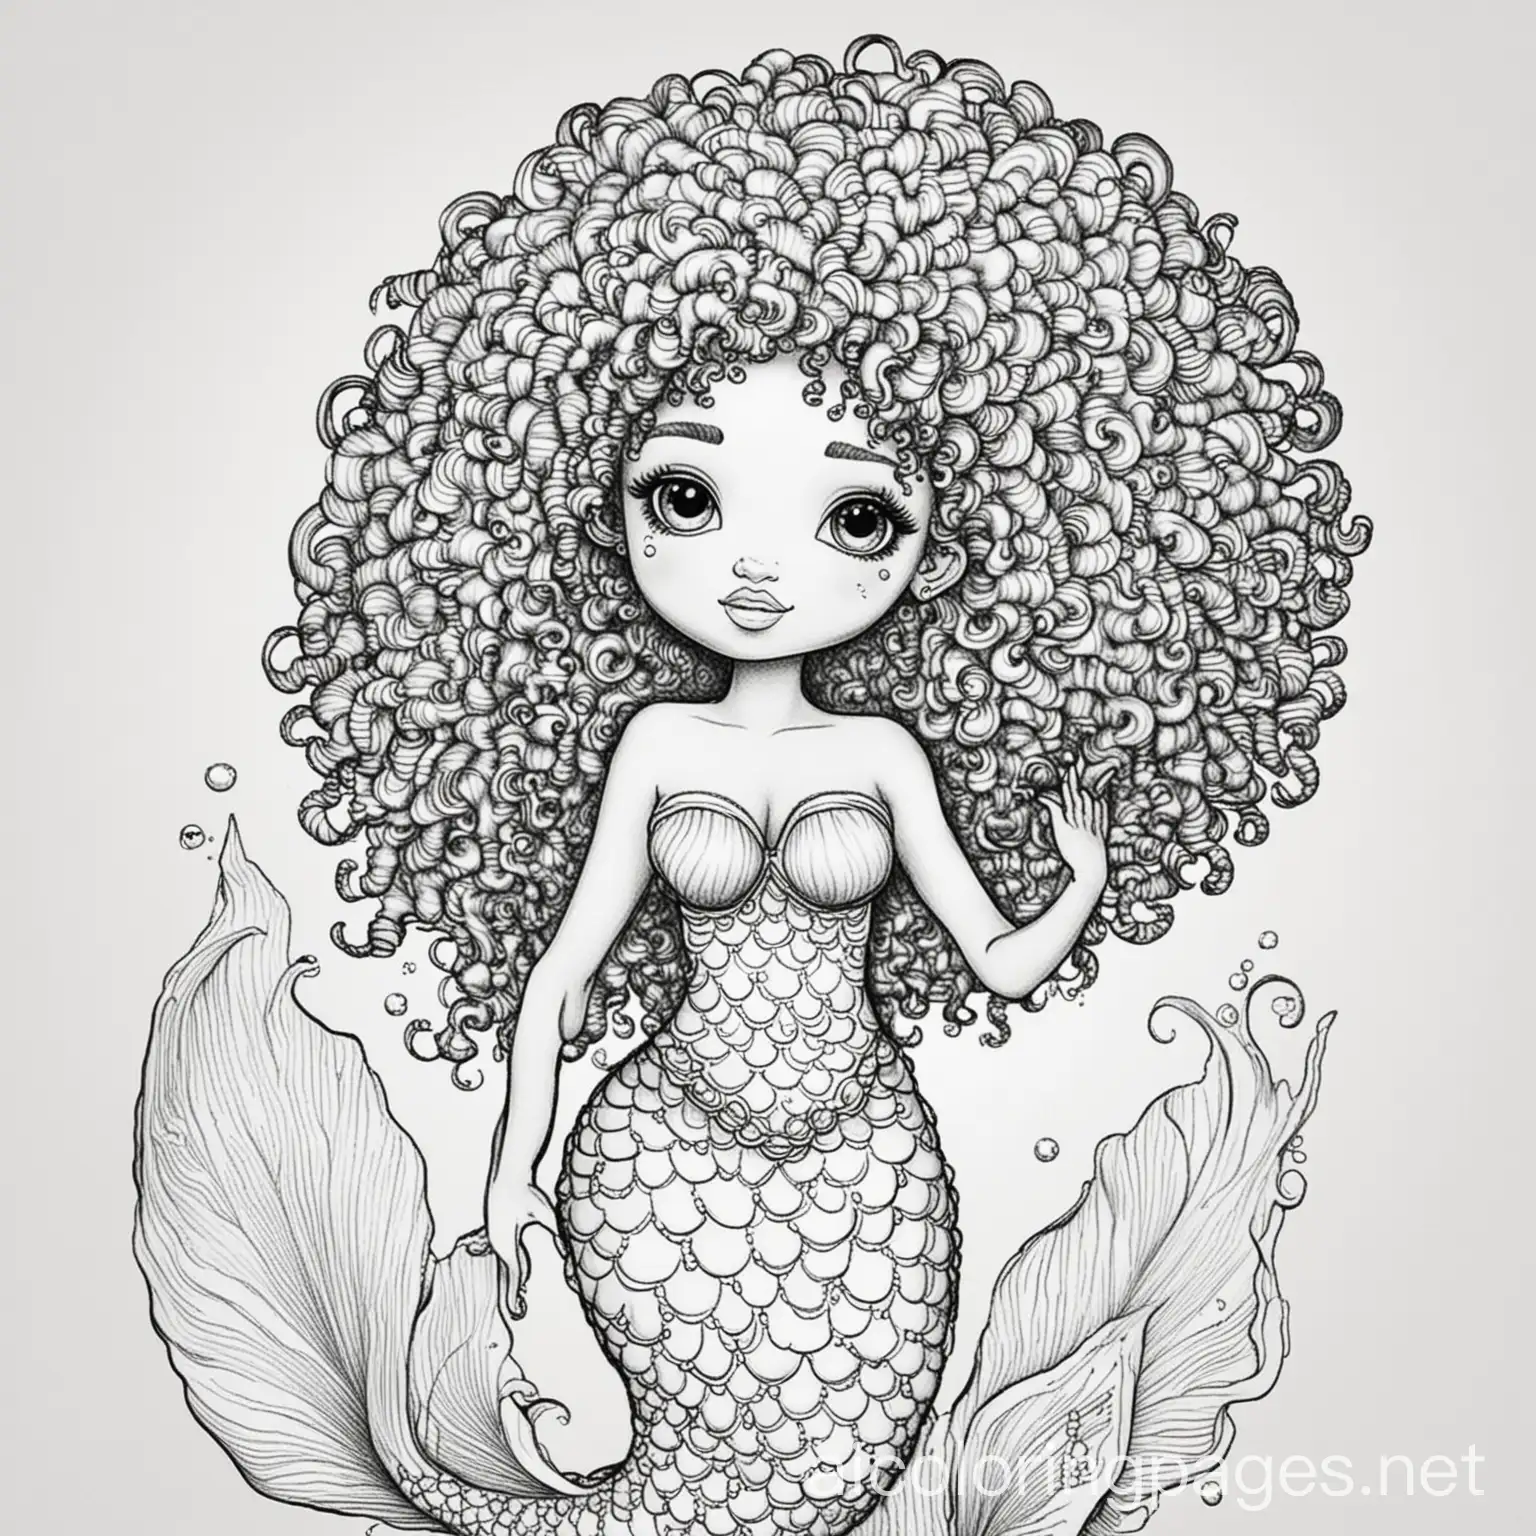  mermaid with an afro
, Coloring Page, black and white, line art, white background, Simplicity, Ample White Space. The background of the coloring page is plain white to make it easy for young children to color within the lines. The outlines of all the subjects are easy to distinguish, making it simple for kids to color without too much difficulty